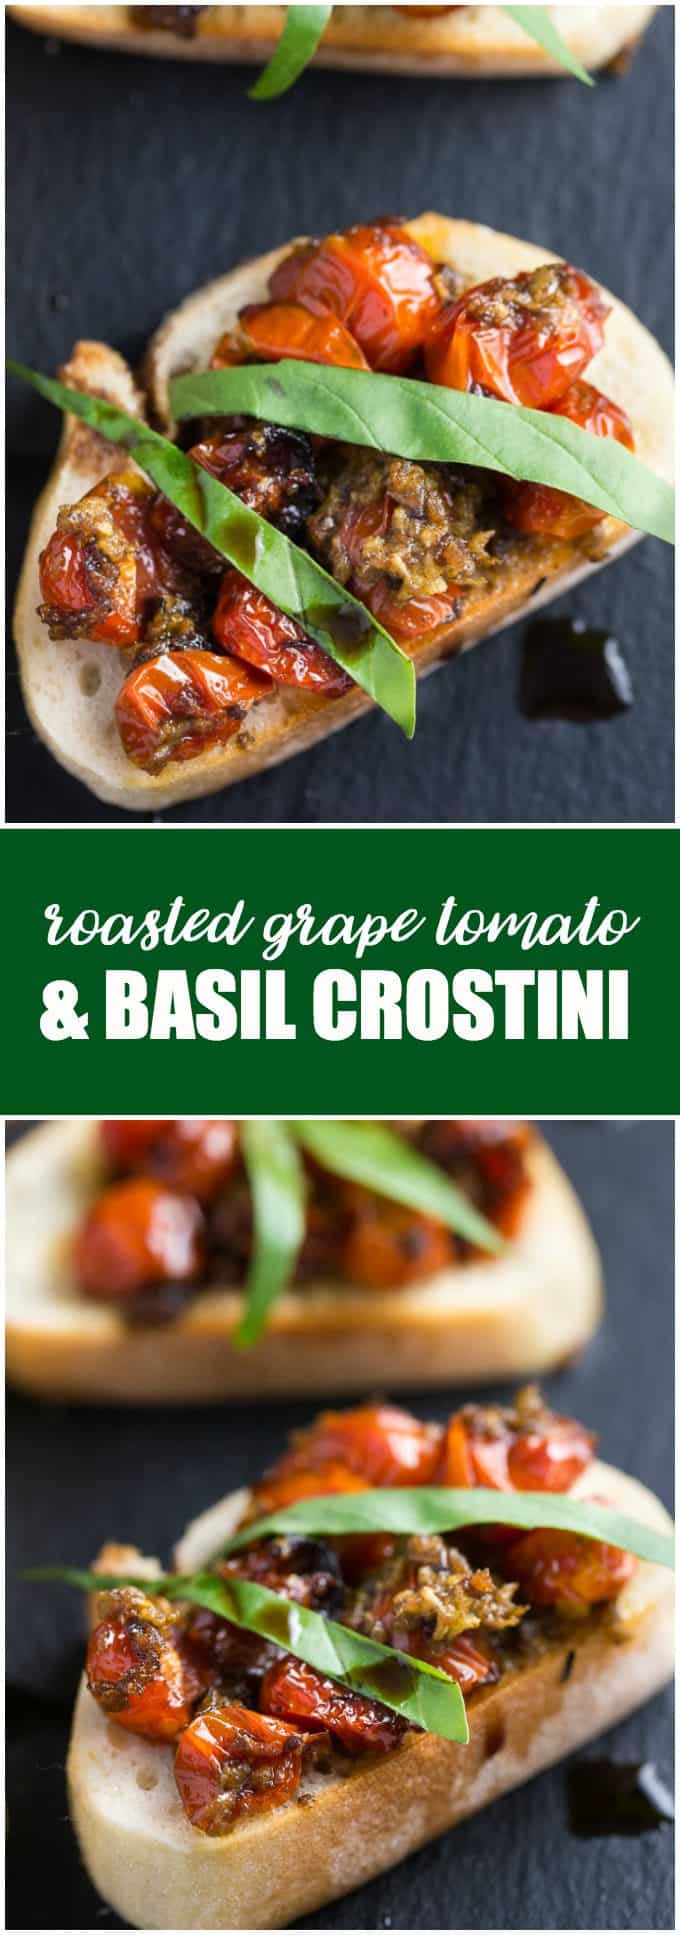 Roasted Grape Tomato and Basil Crostini - A toasted baguette is topped with grape tomatoes roasted in garlic and olive oil and finished off with ribbons of fresh basil and a drizzle of balsamic vinegar.